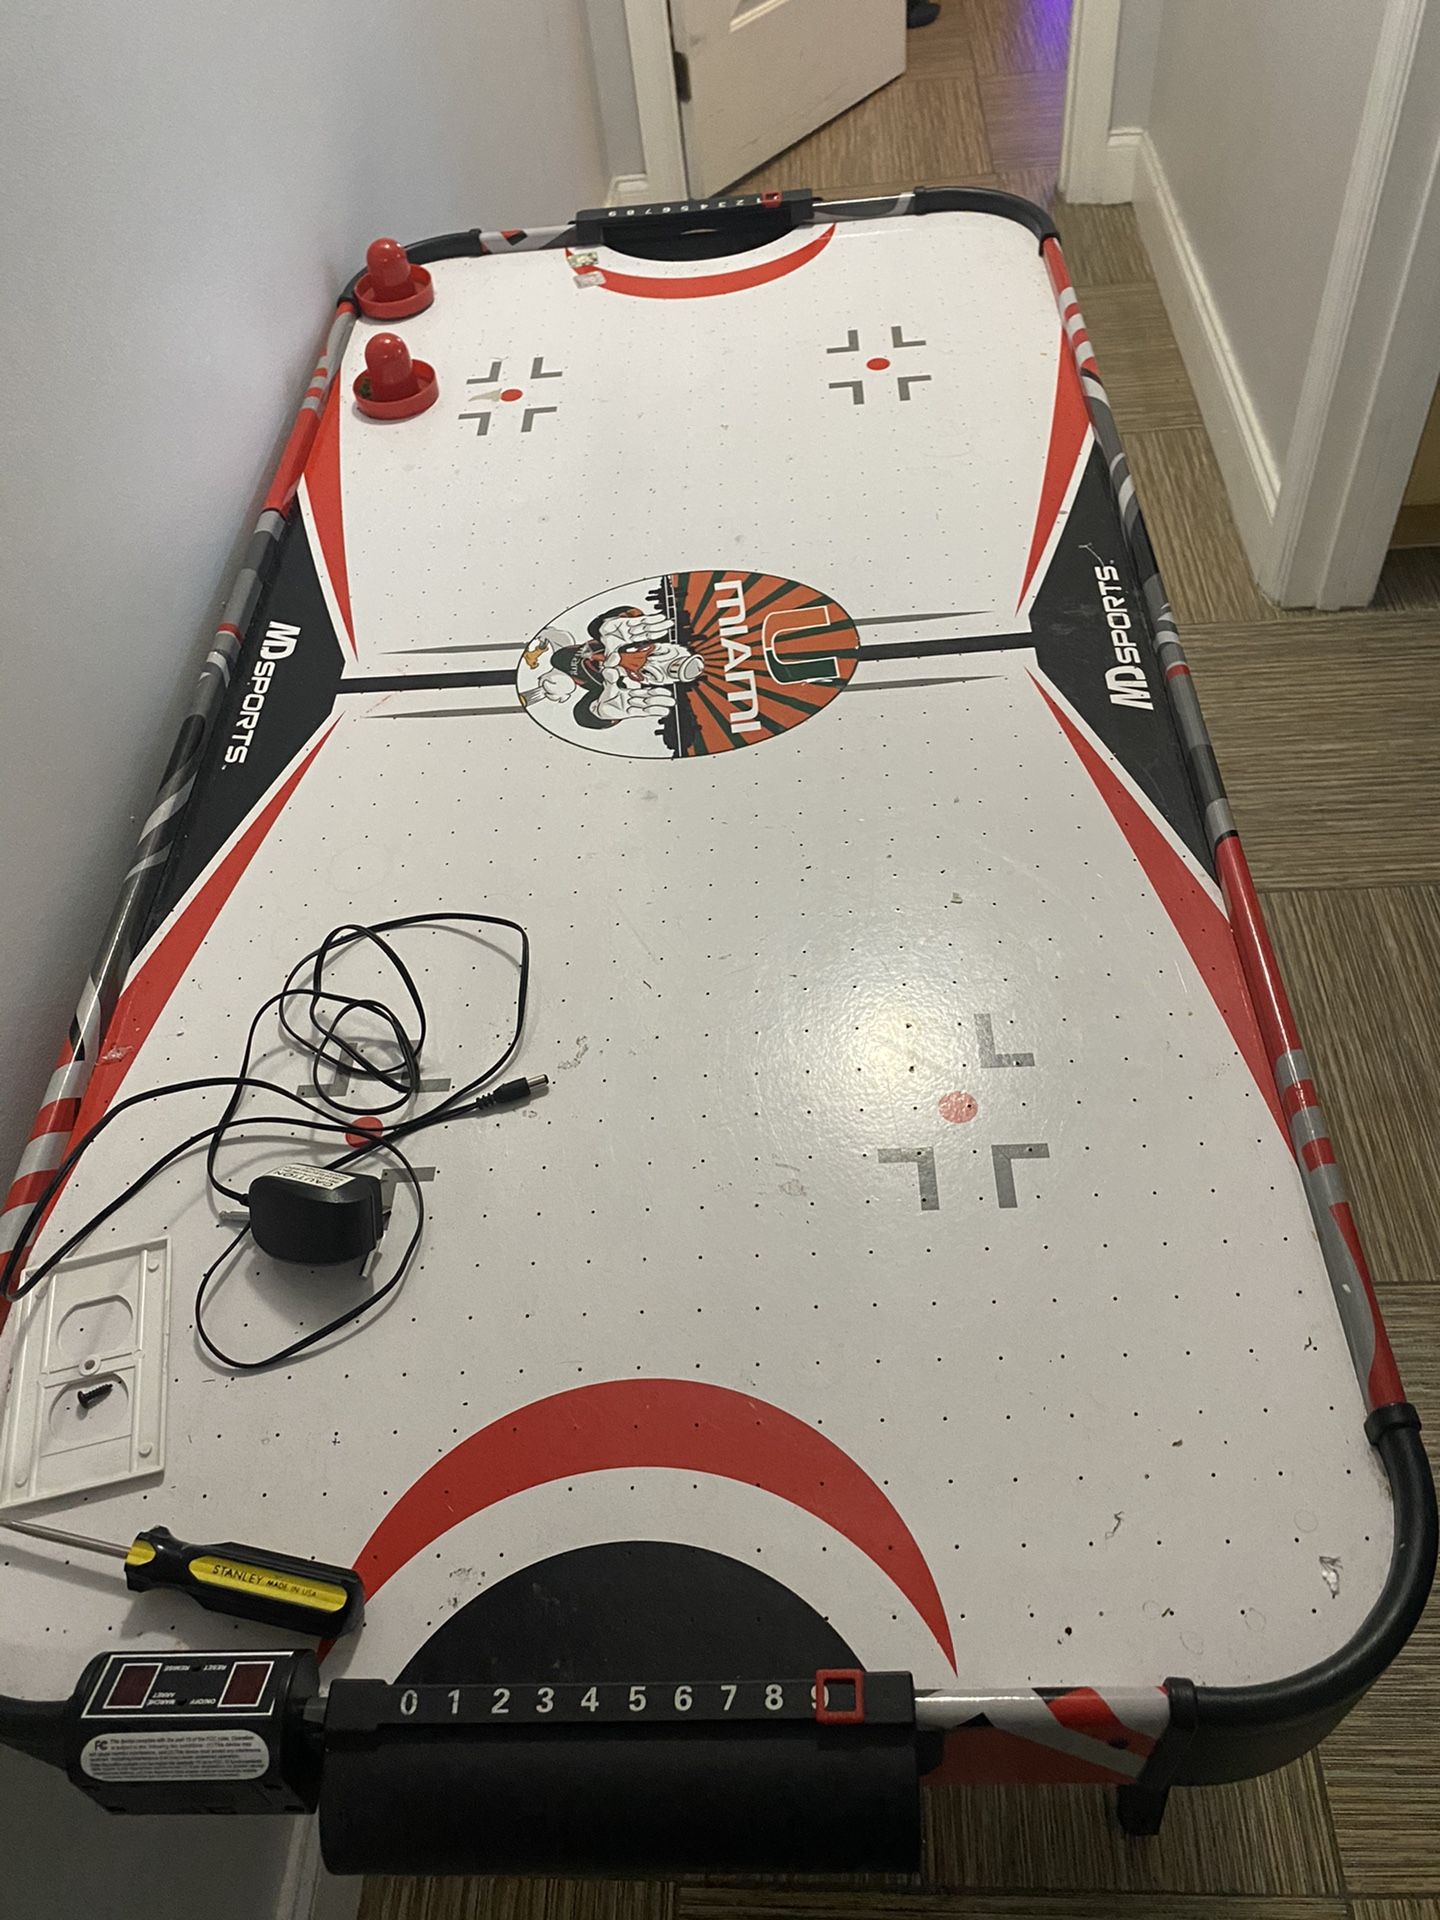 Kids air hockey table . Used but works perfectly 150.00 ObO